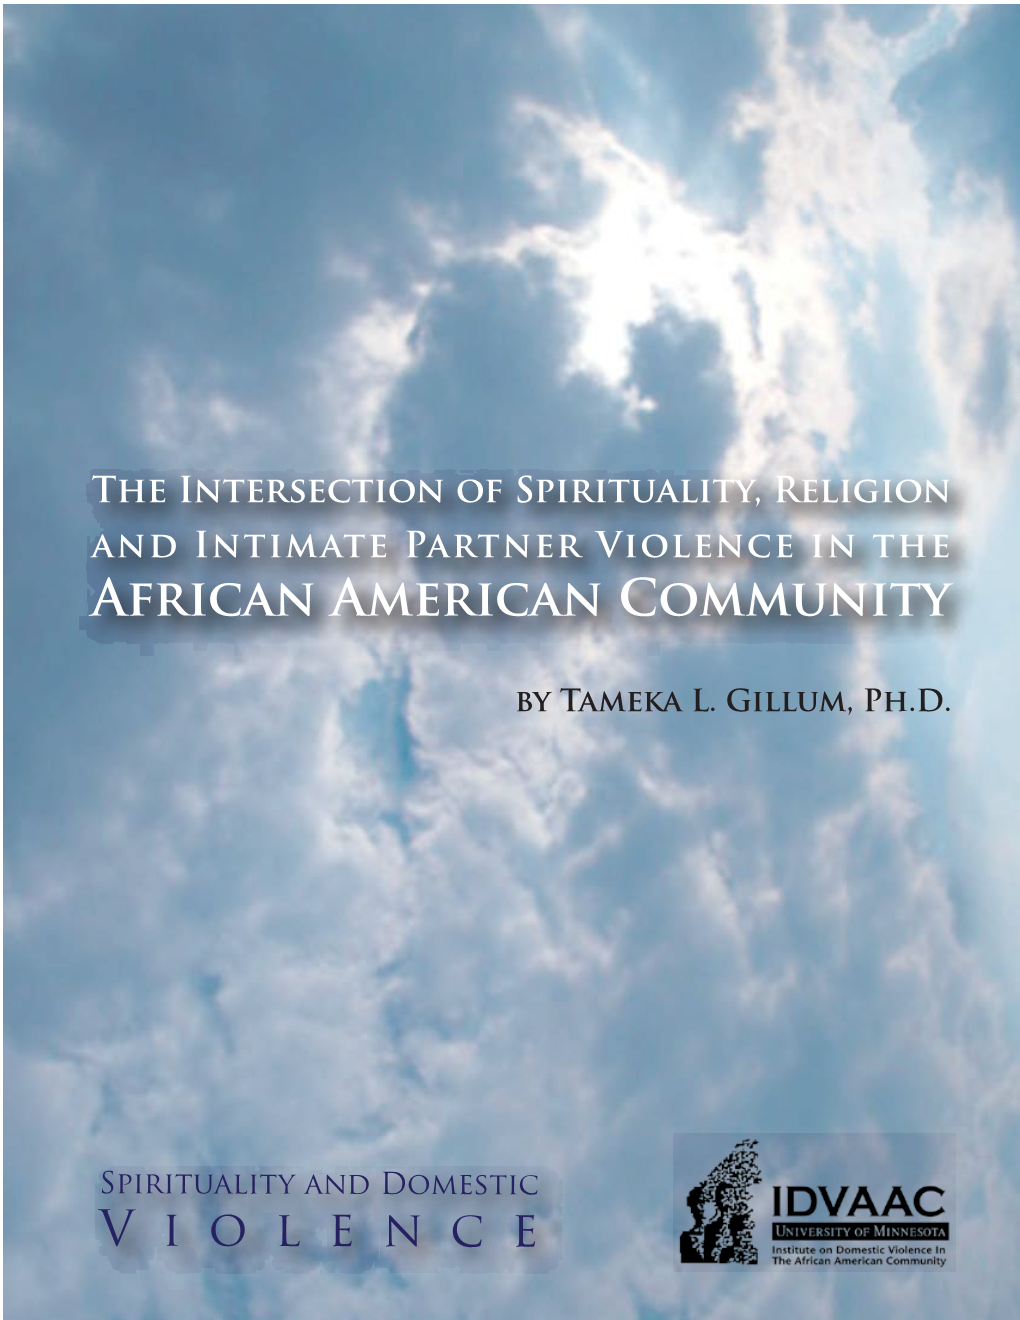 The Intersection of Spirituality, Religion, and Intimate Partner Violence in the African American Community